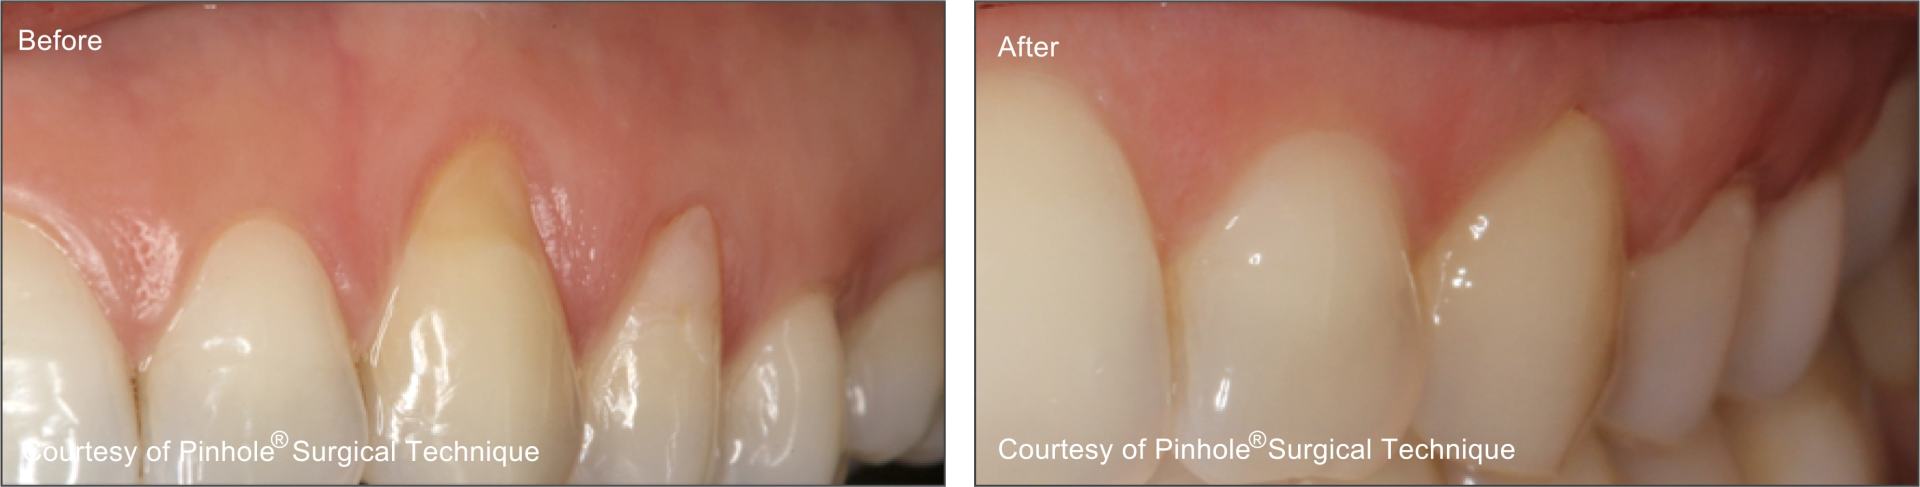 Teeth image 6 — East Hills Family Dentistry in Anaheim Hills, CA